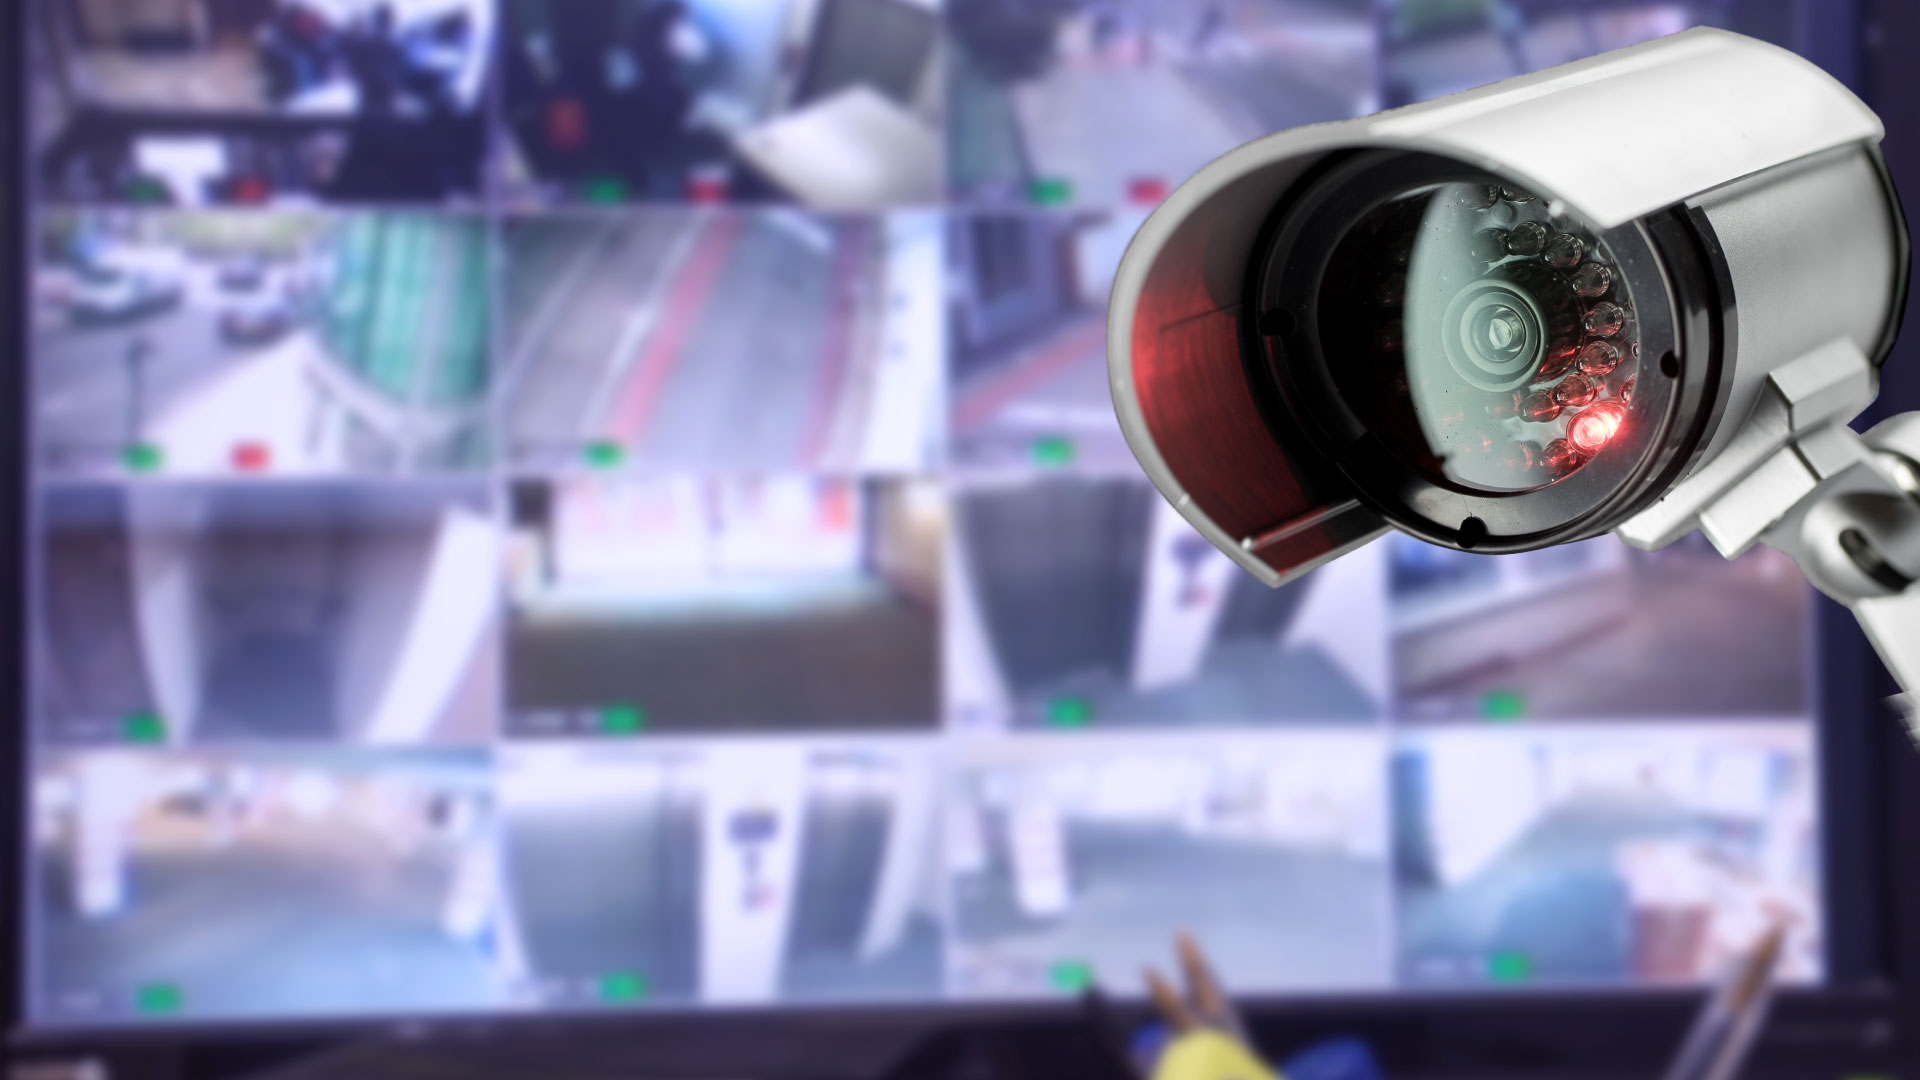 CCTV camera with images of security camera feeds in background.